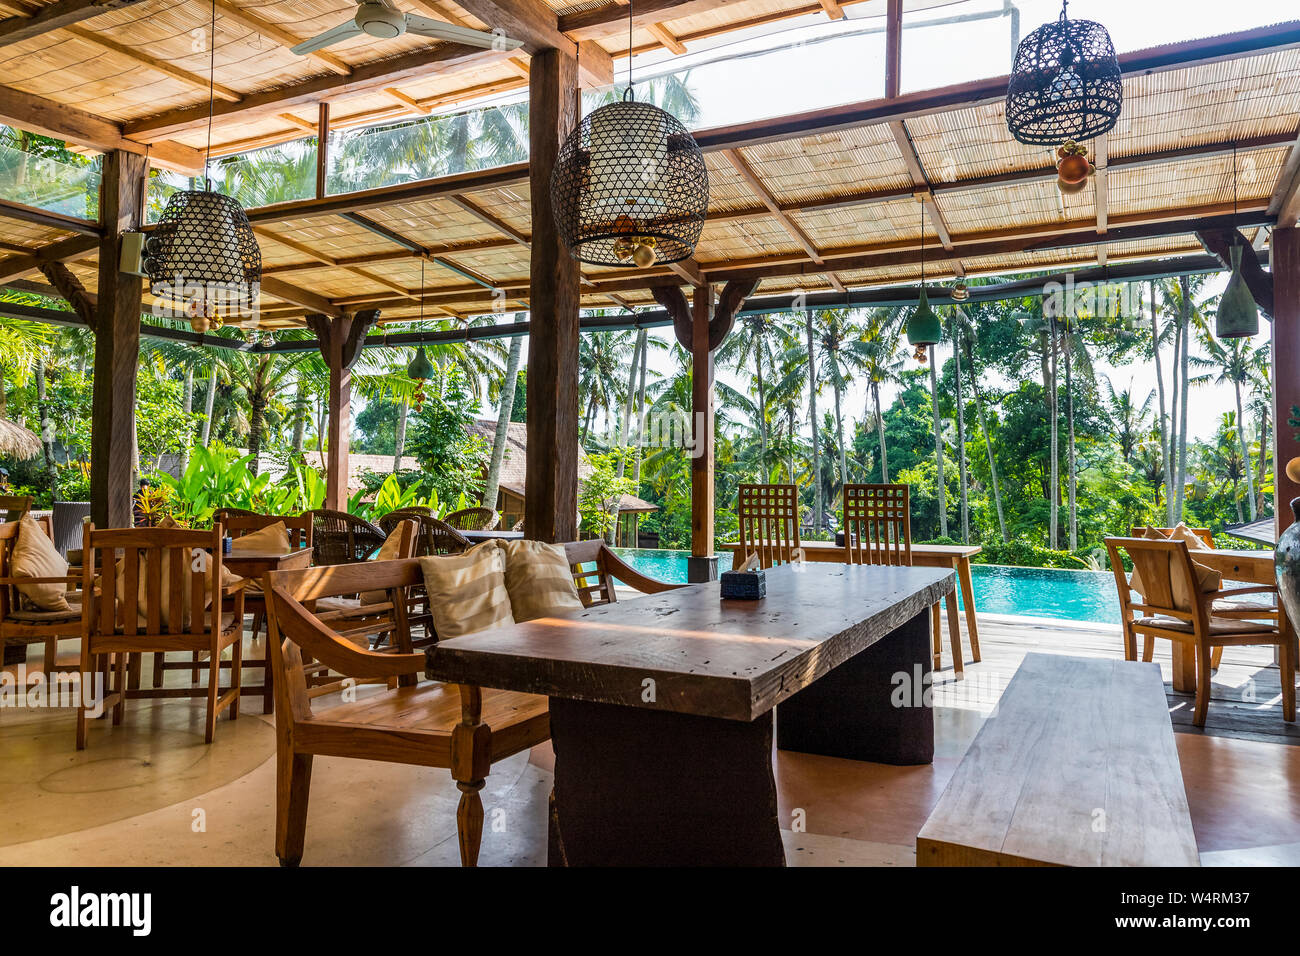 Canopies over chairs and tables, Ubud, Bali, Indonesia Stock Photo